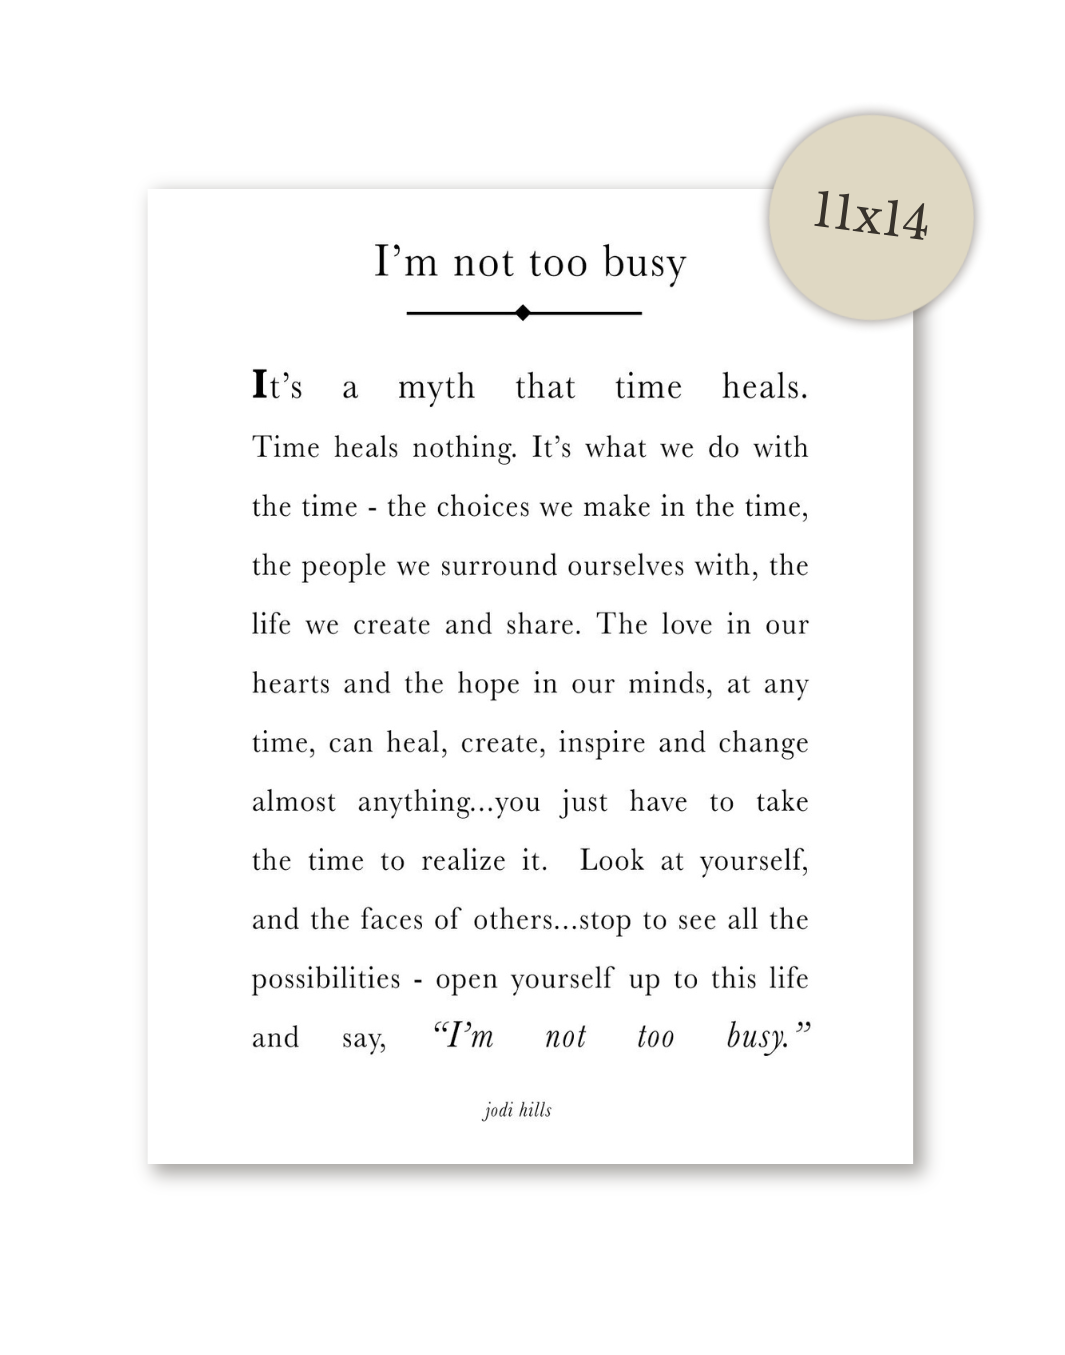 i'm not too busy - printable